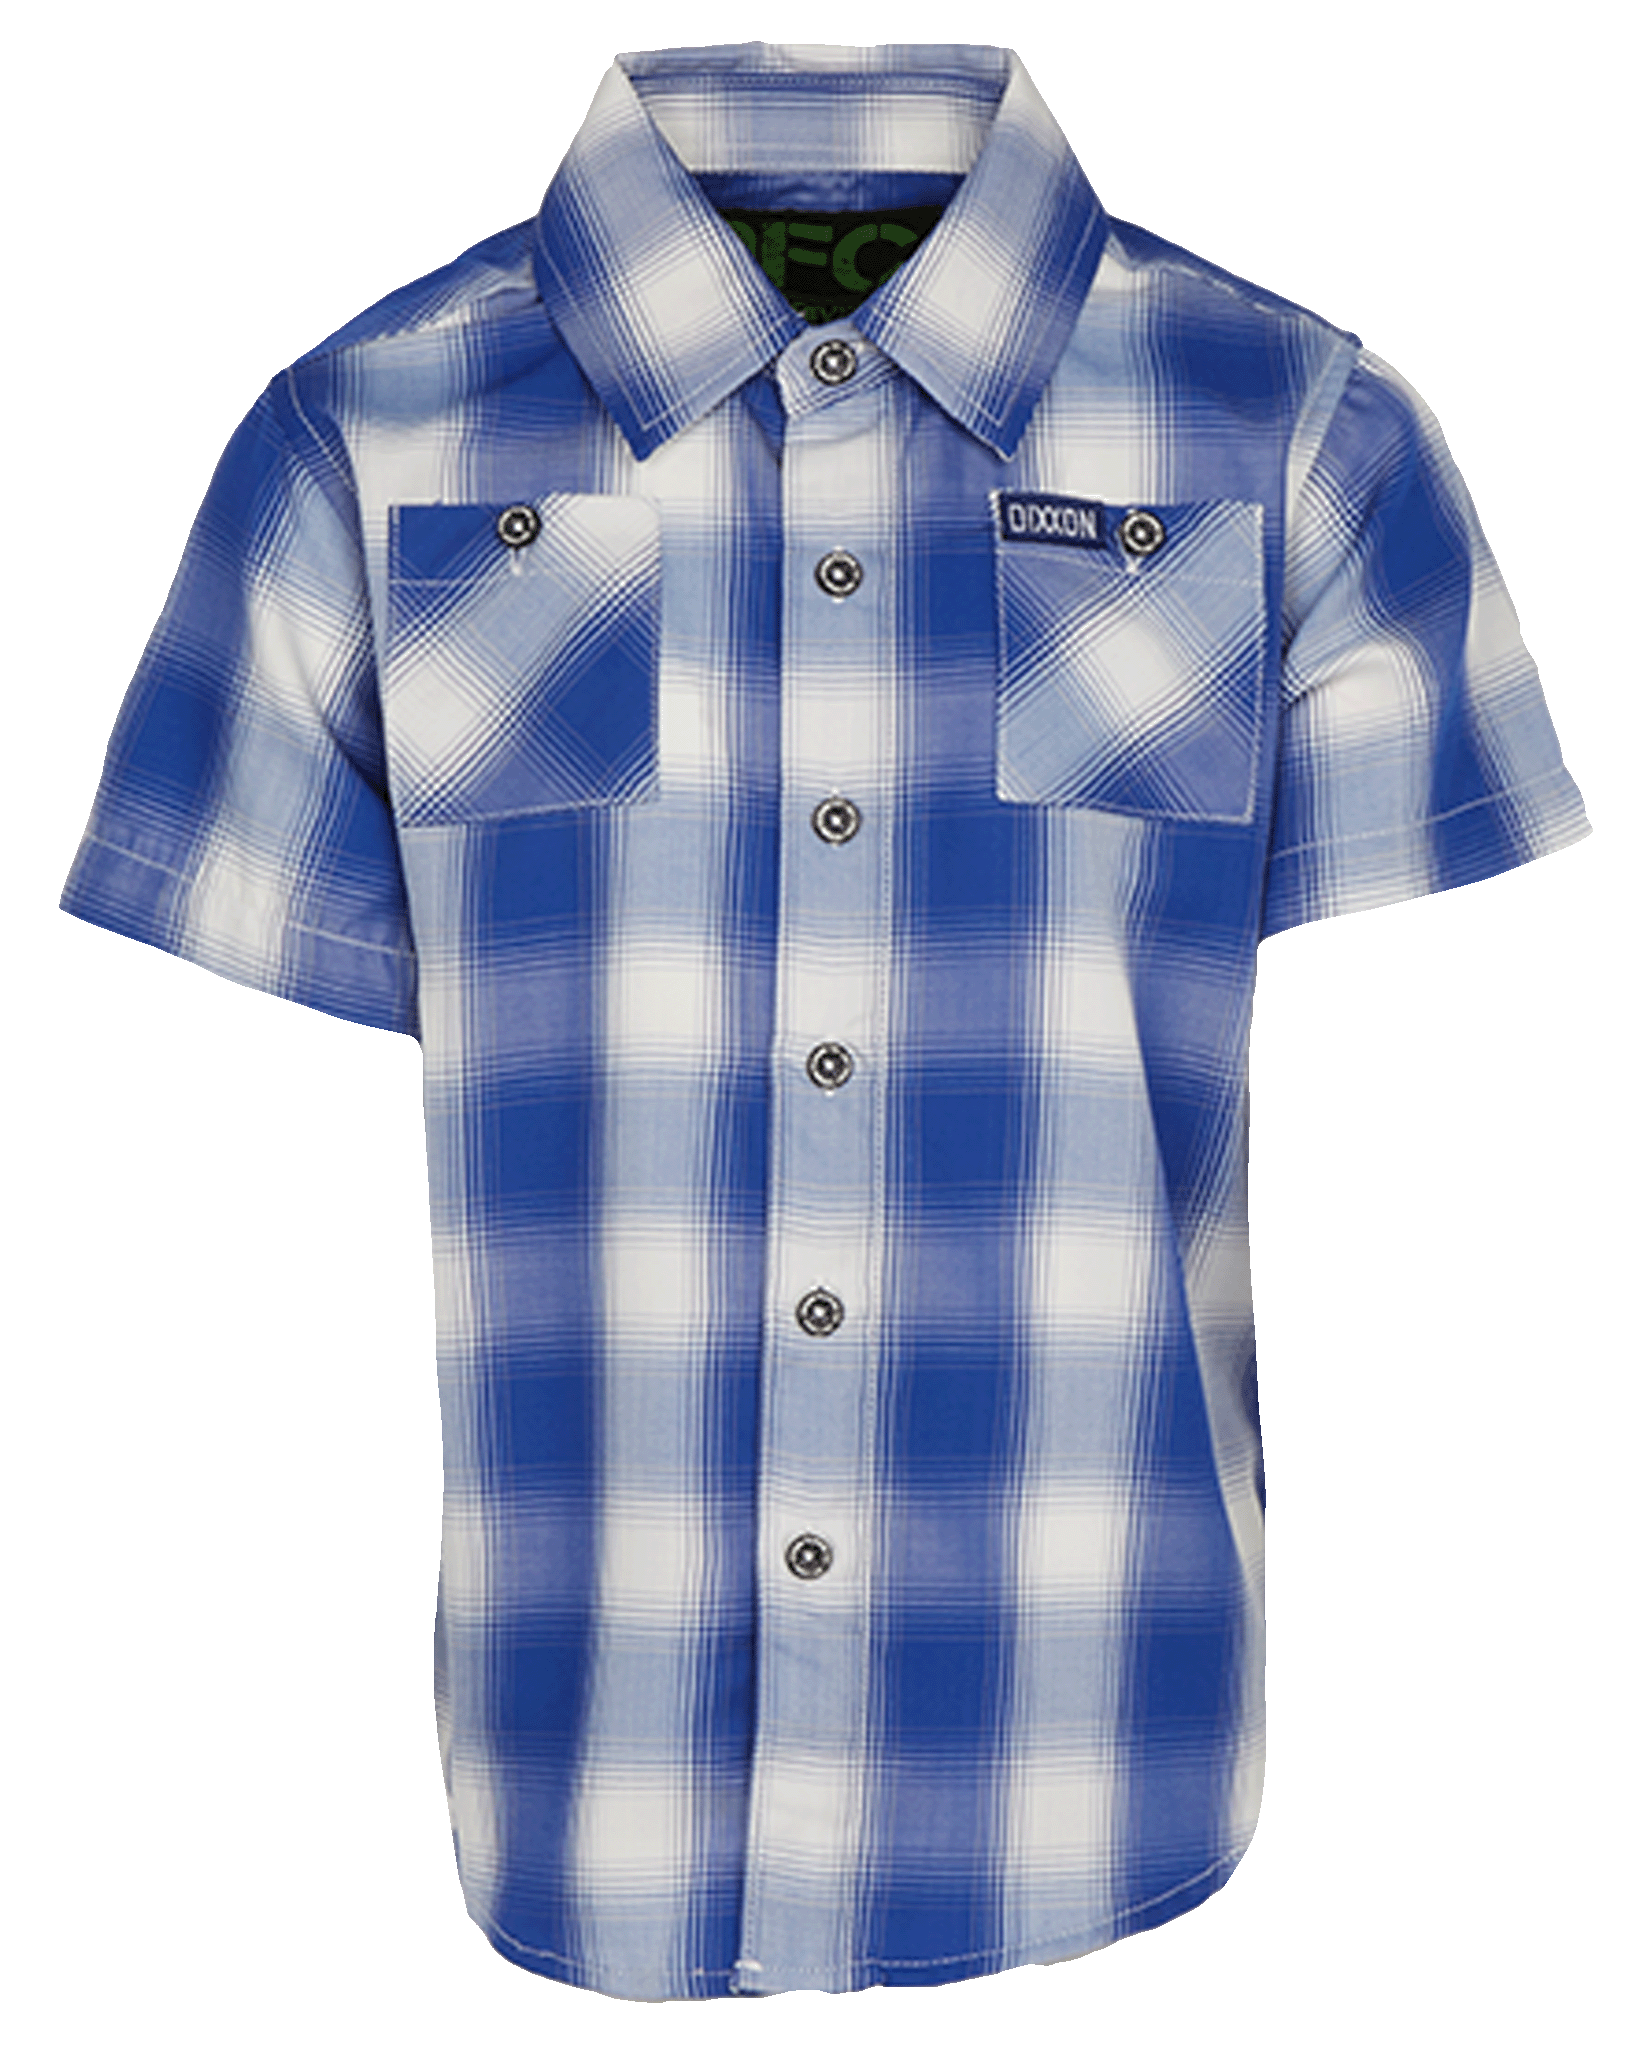 PIPELINE BAMBOO SHORT SLEEVE BUTTON UP - YOUTH S